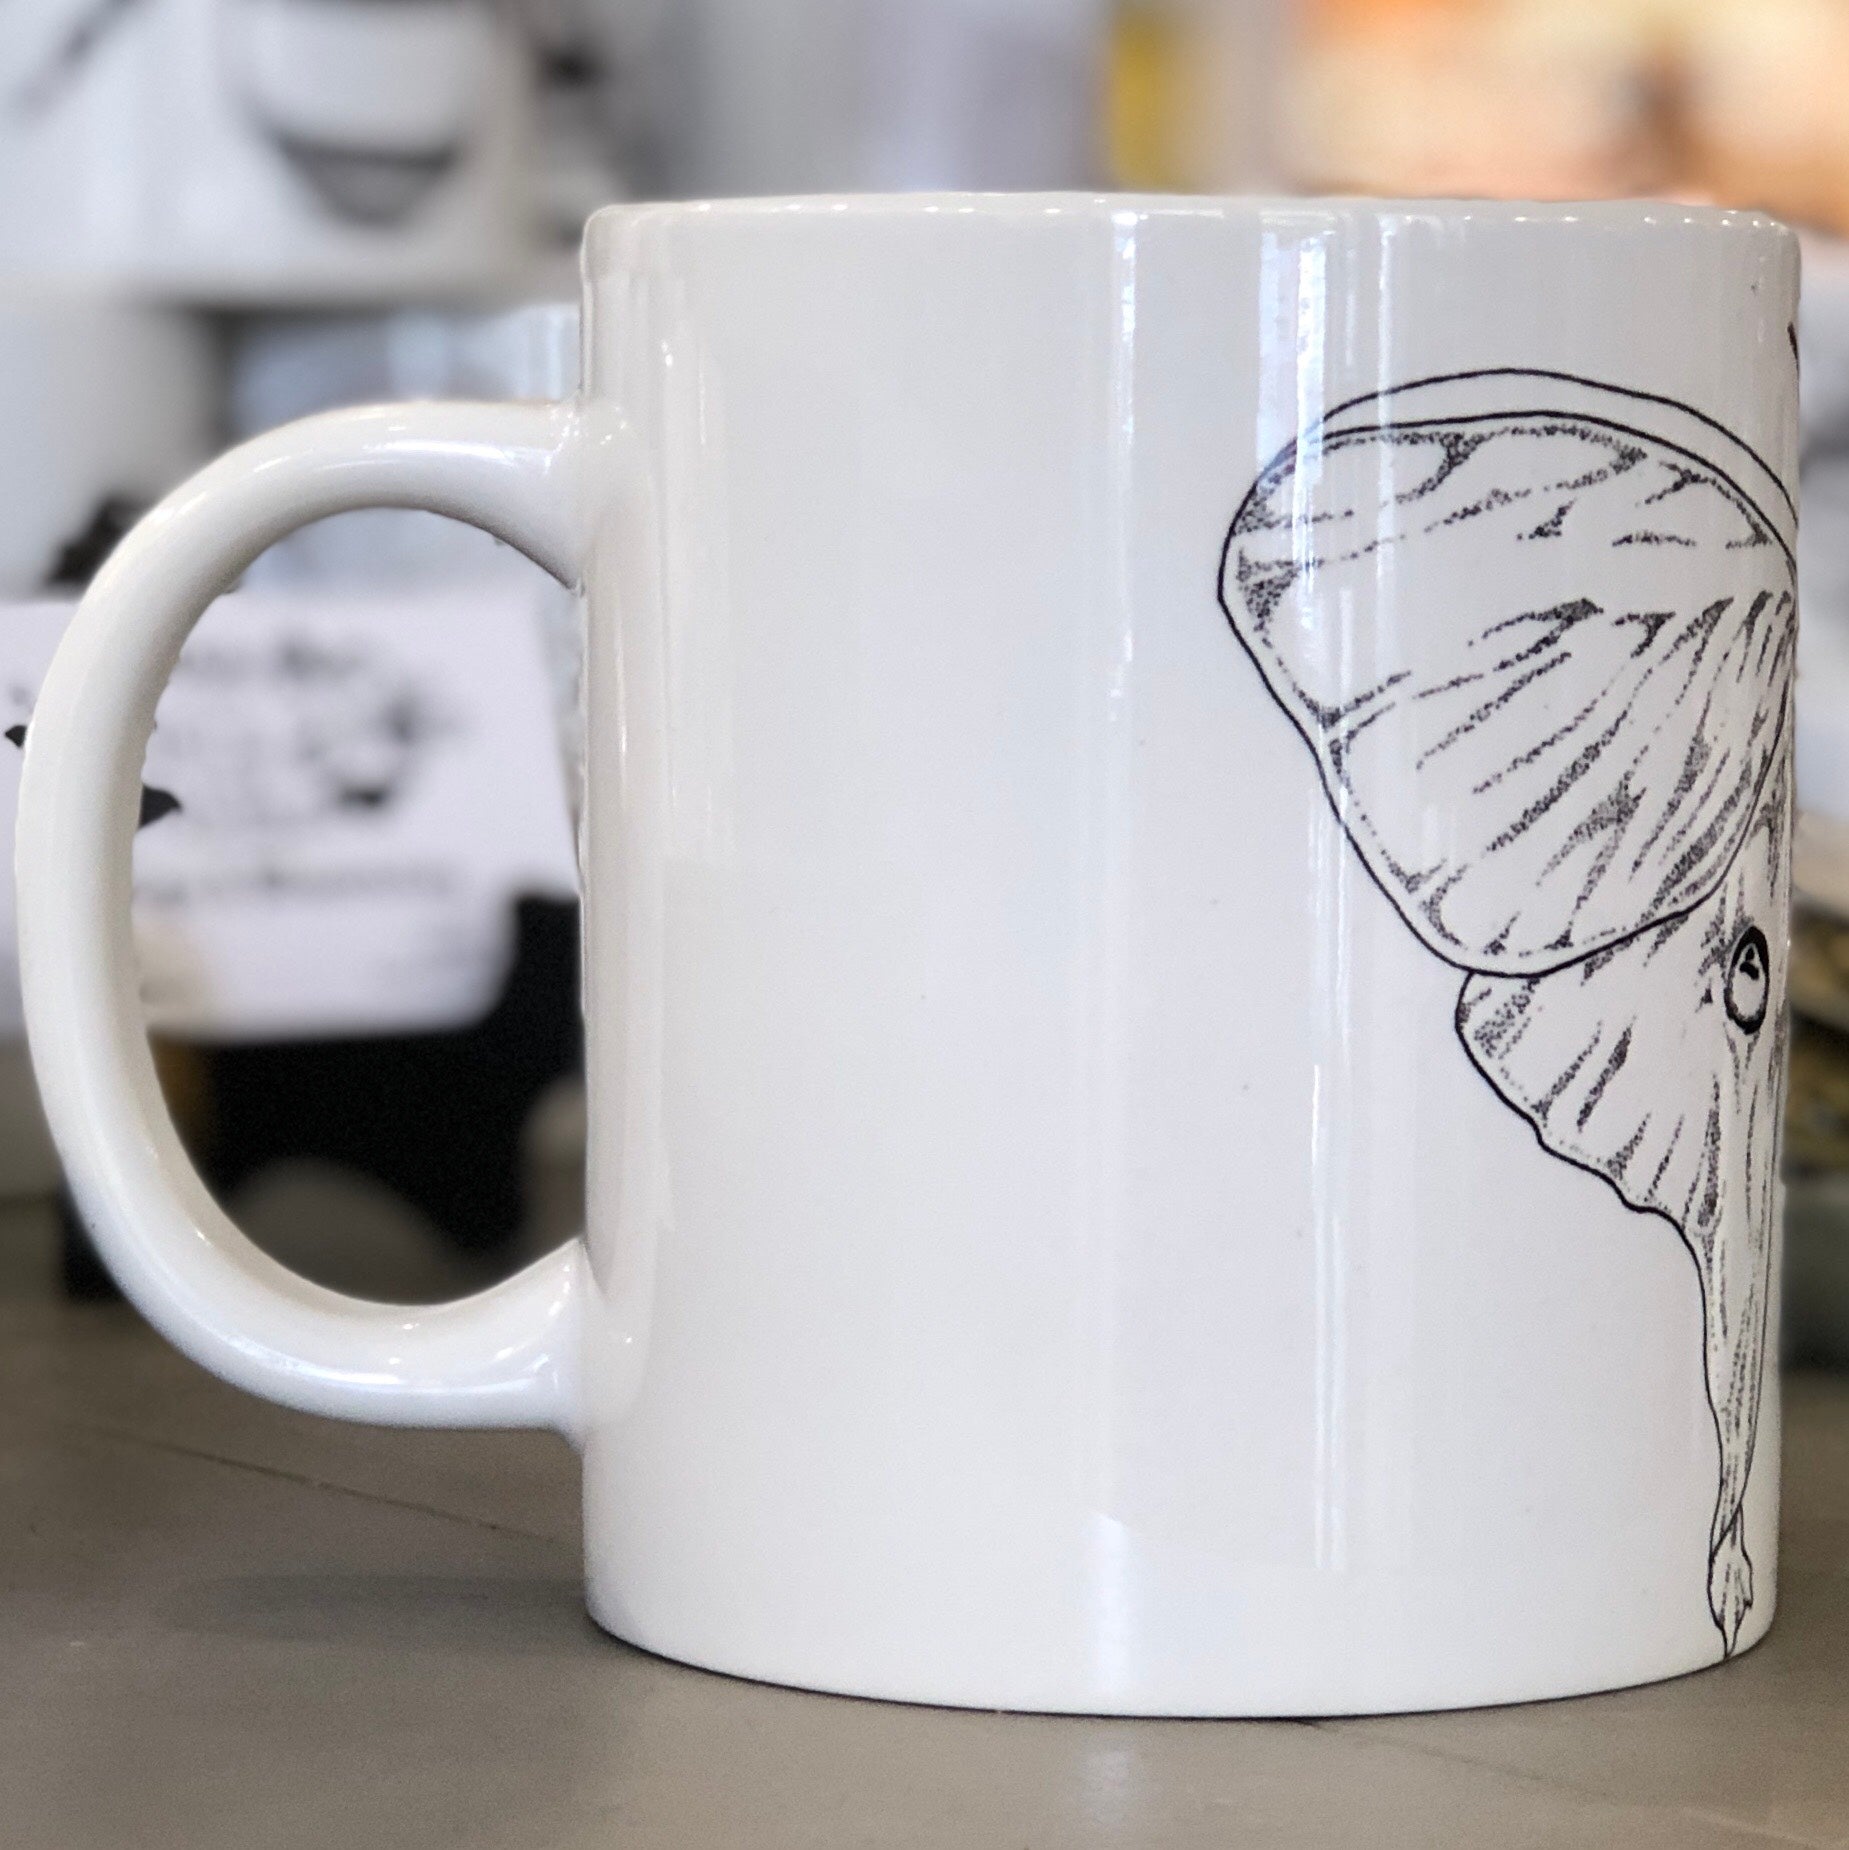 A large white mug with a black luna moth design pictured from the side. This is a Large Mug by Birds & Bees sold at The Hare & The Hart.